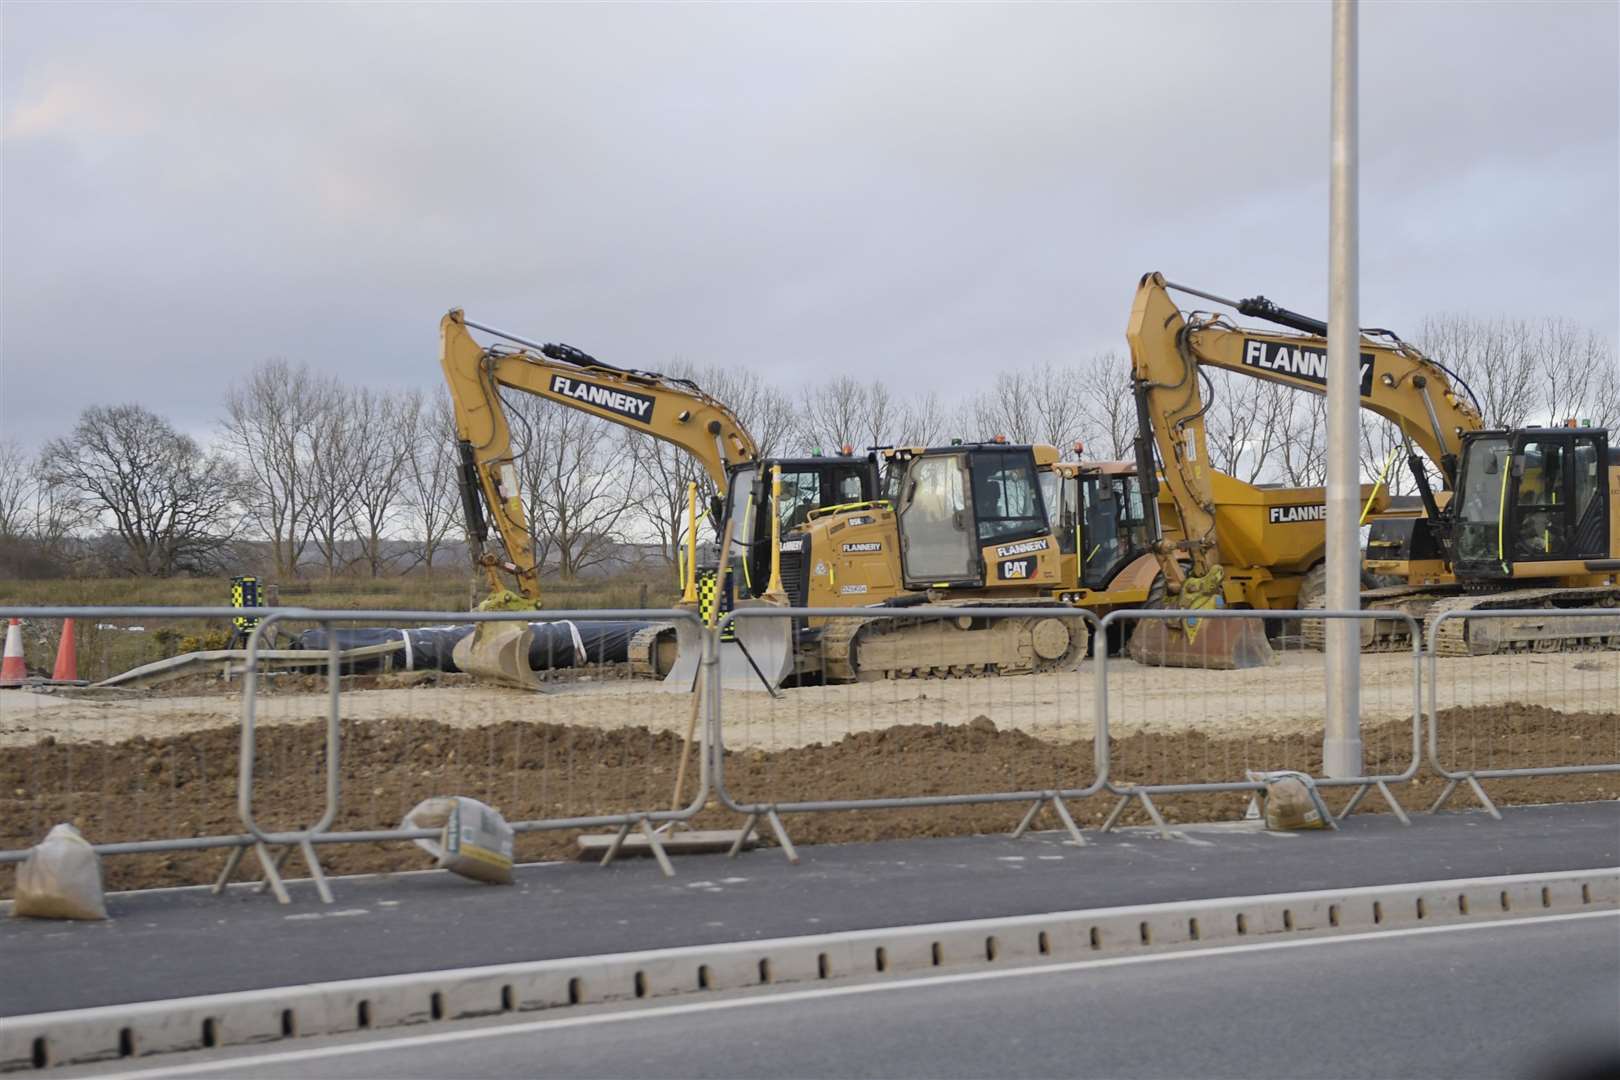 Work on the construction of Junction 10a of the M20